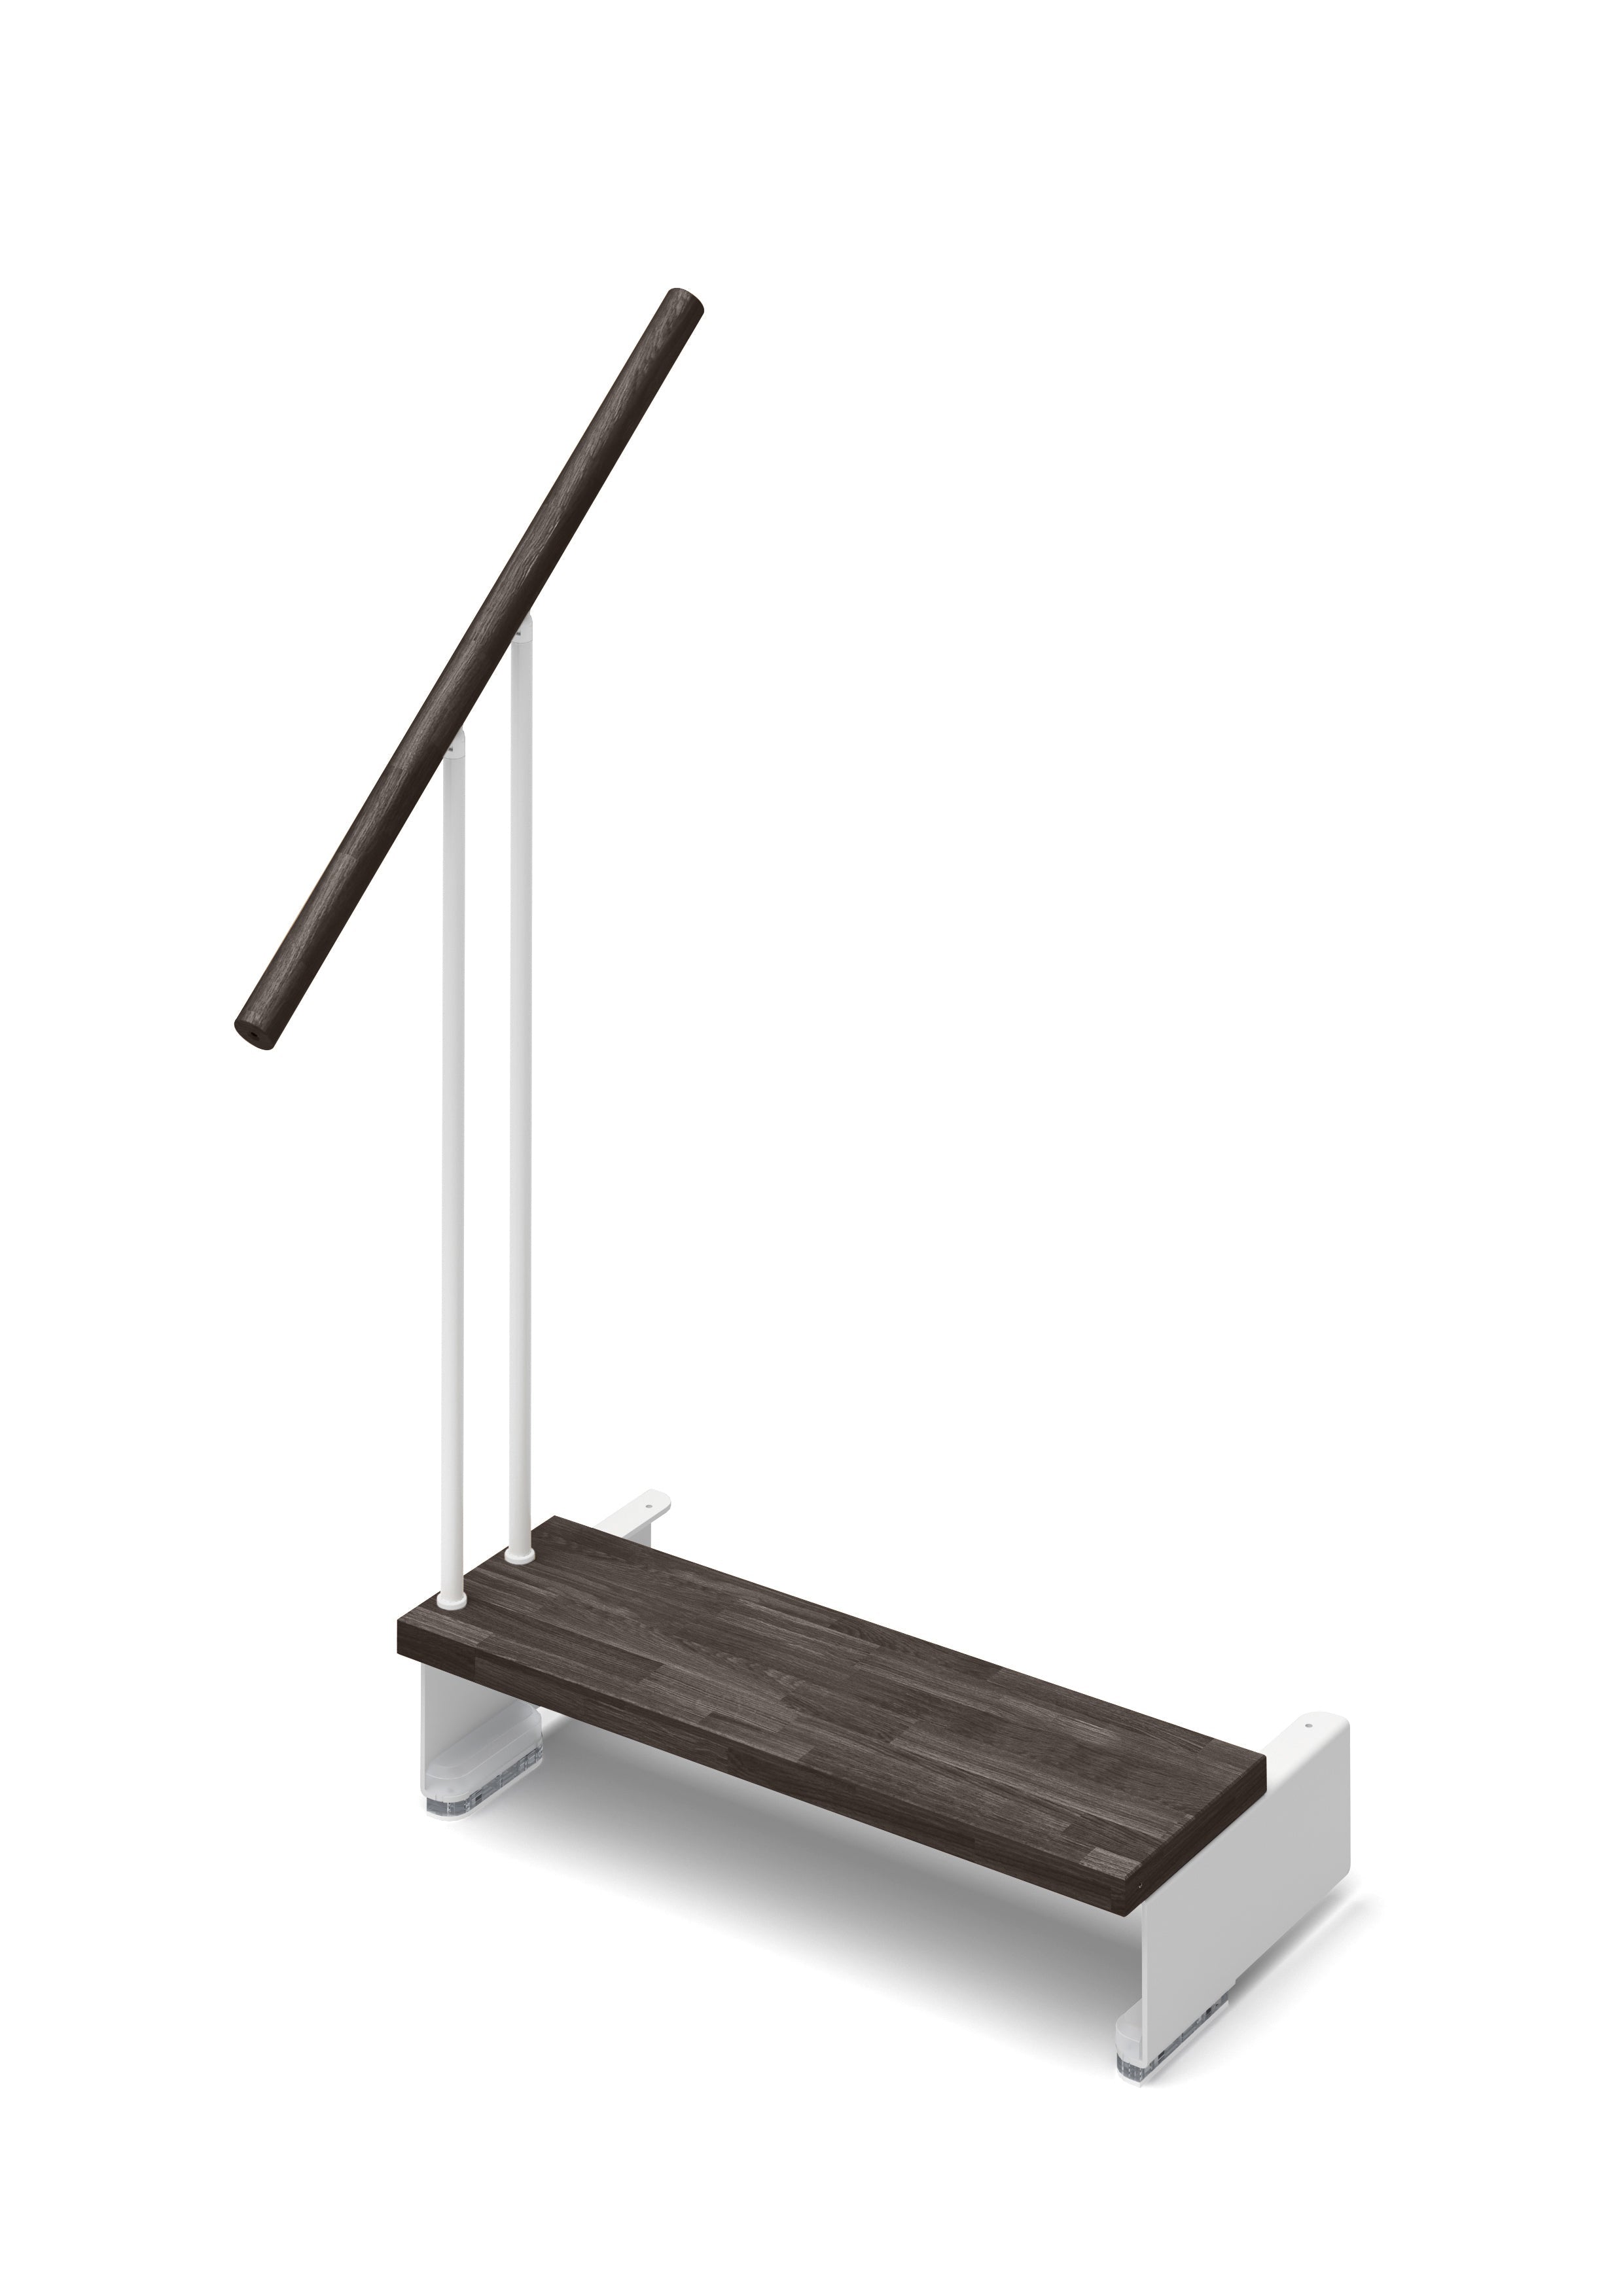 Additional step Adapta 94cm (with structure and railing) - Wengé 23